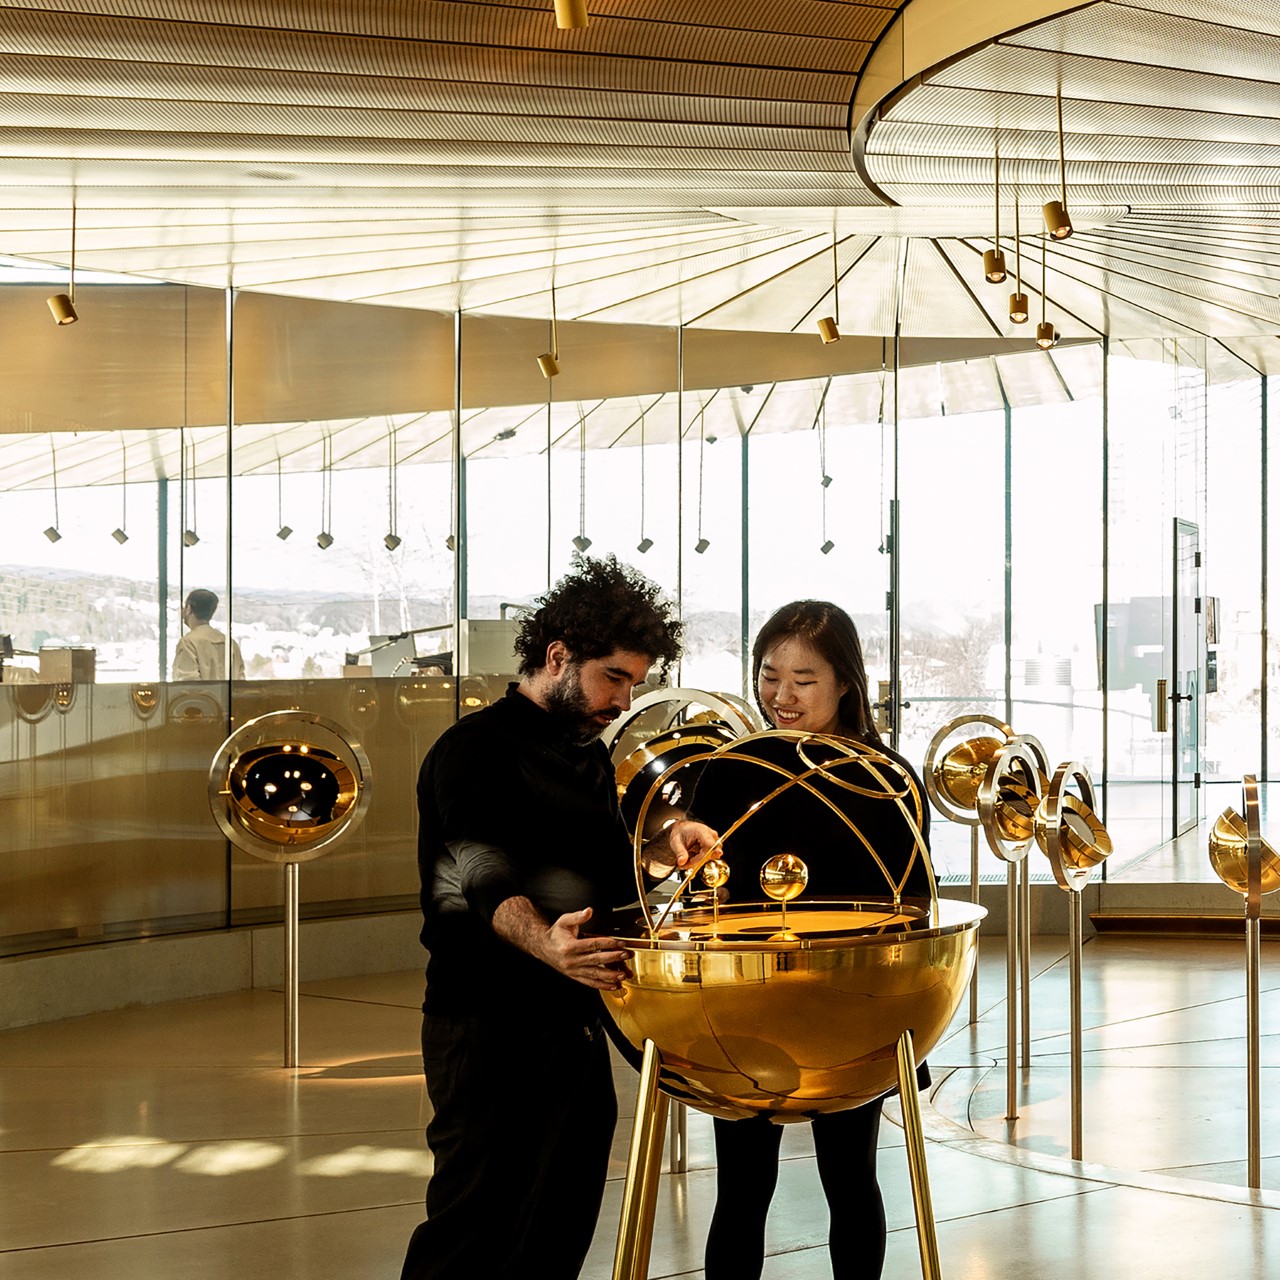 The Audemars Piguet Museum immerses visitors into the world of intricate luxury watchmaking